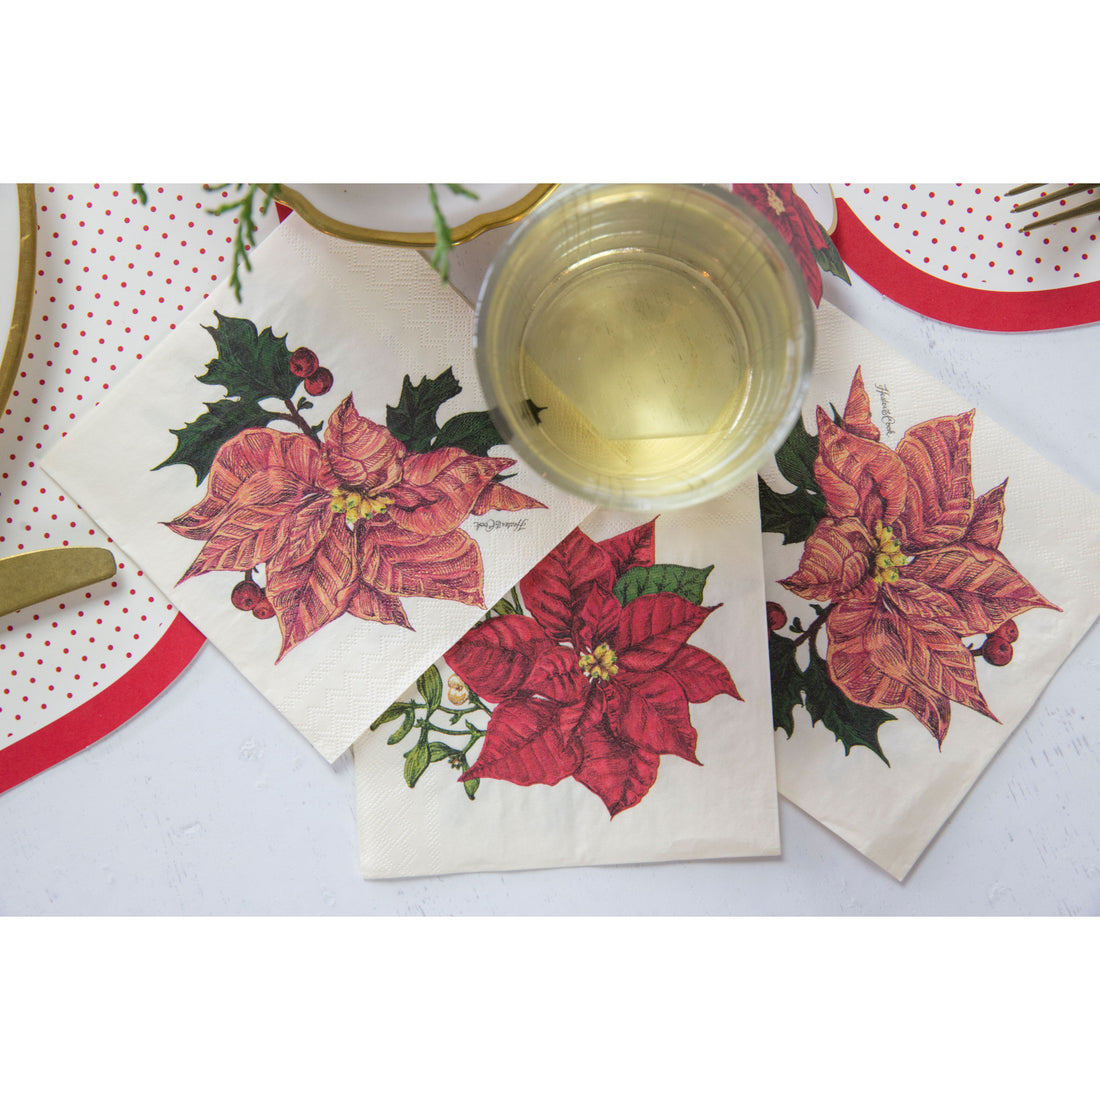 Three Poinsettia Cocktail Napkins spread on a table, showing the red front design and the pink back design, next to a glass of white wine.